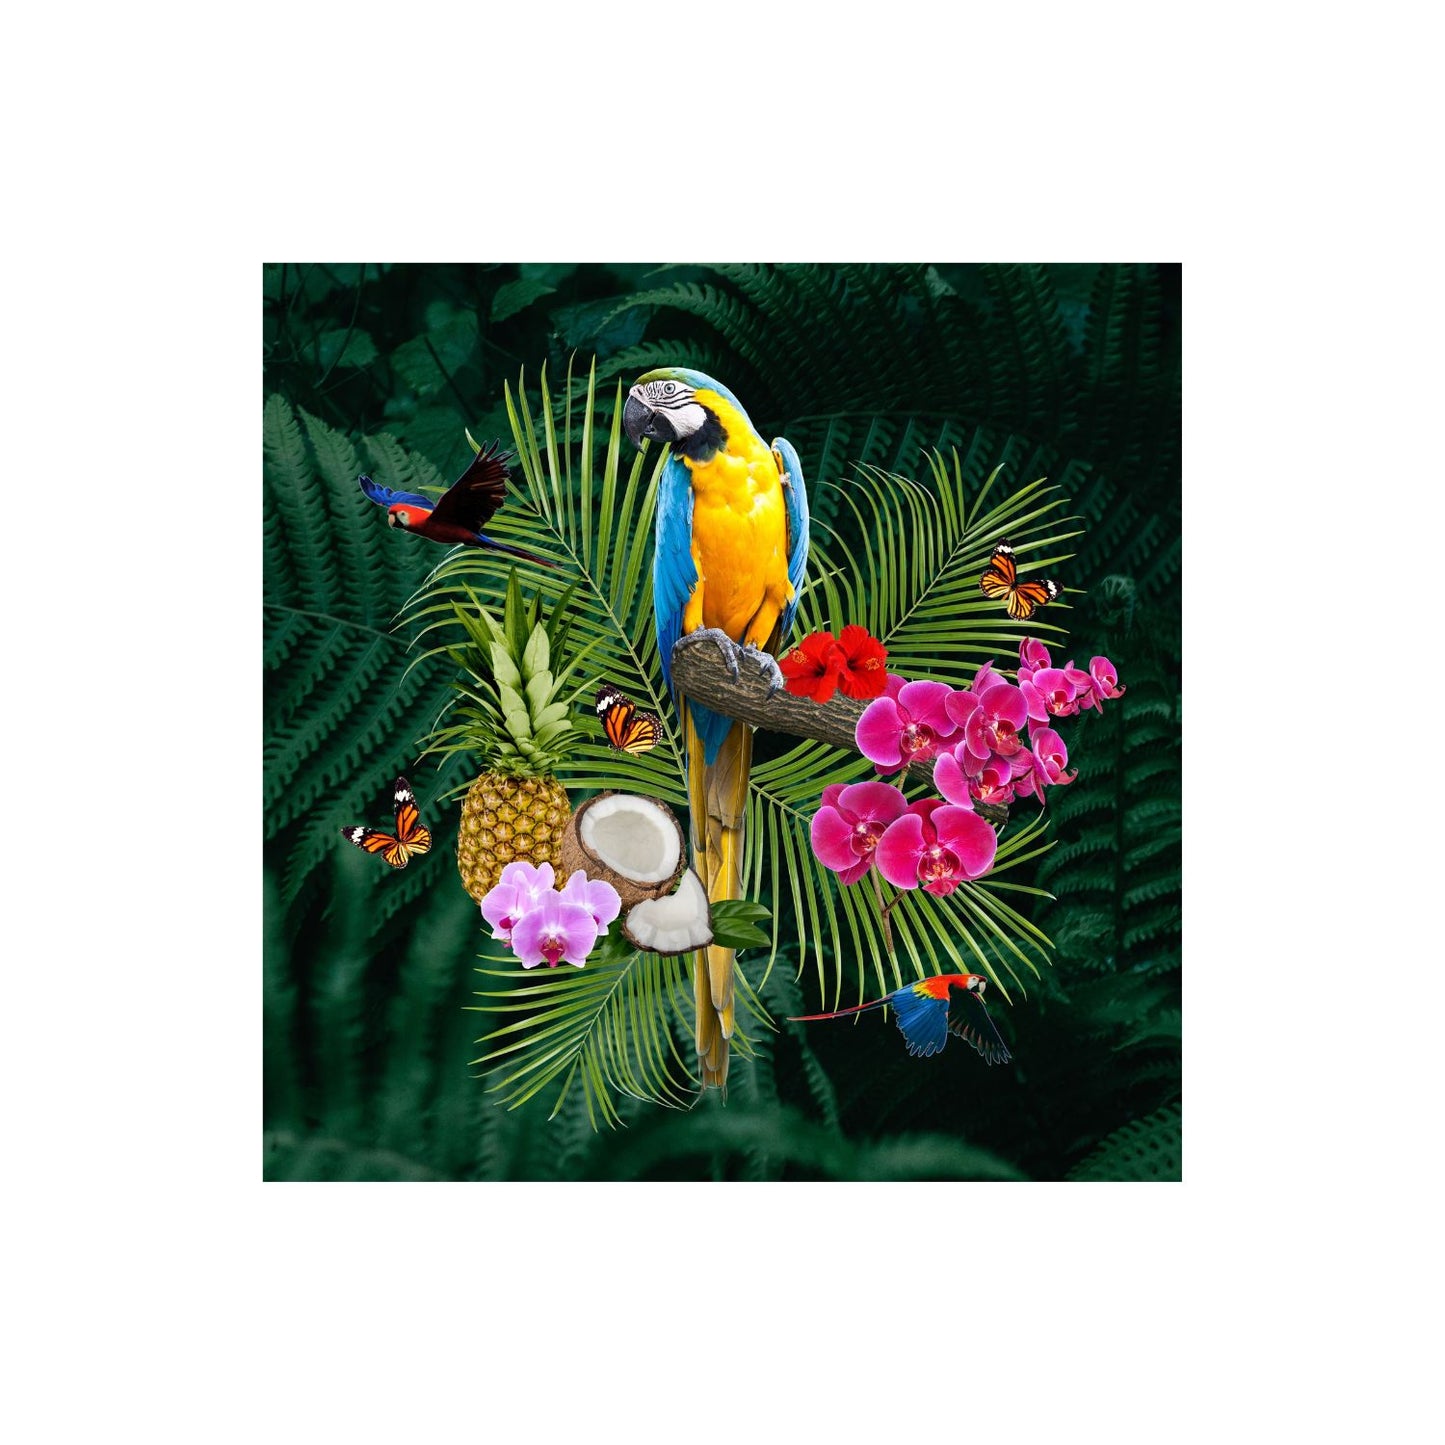 The Macaw Jungle table top by Modscene.